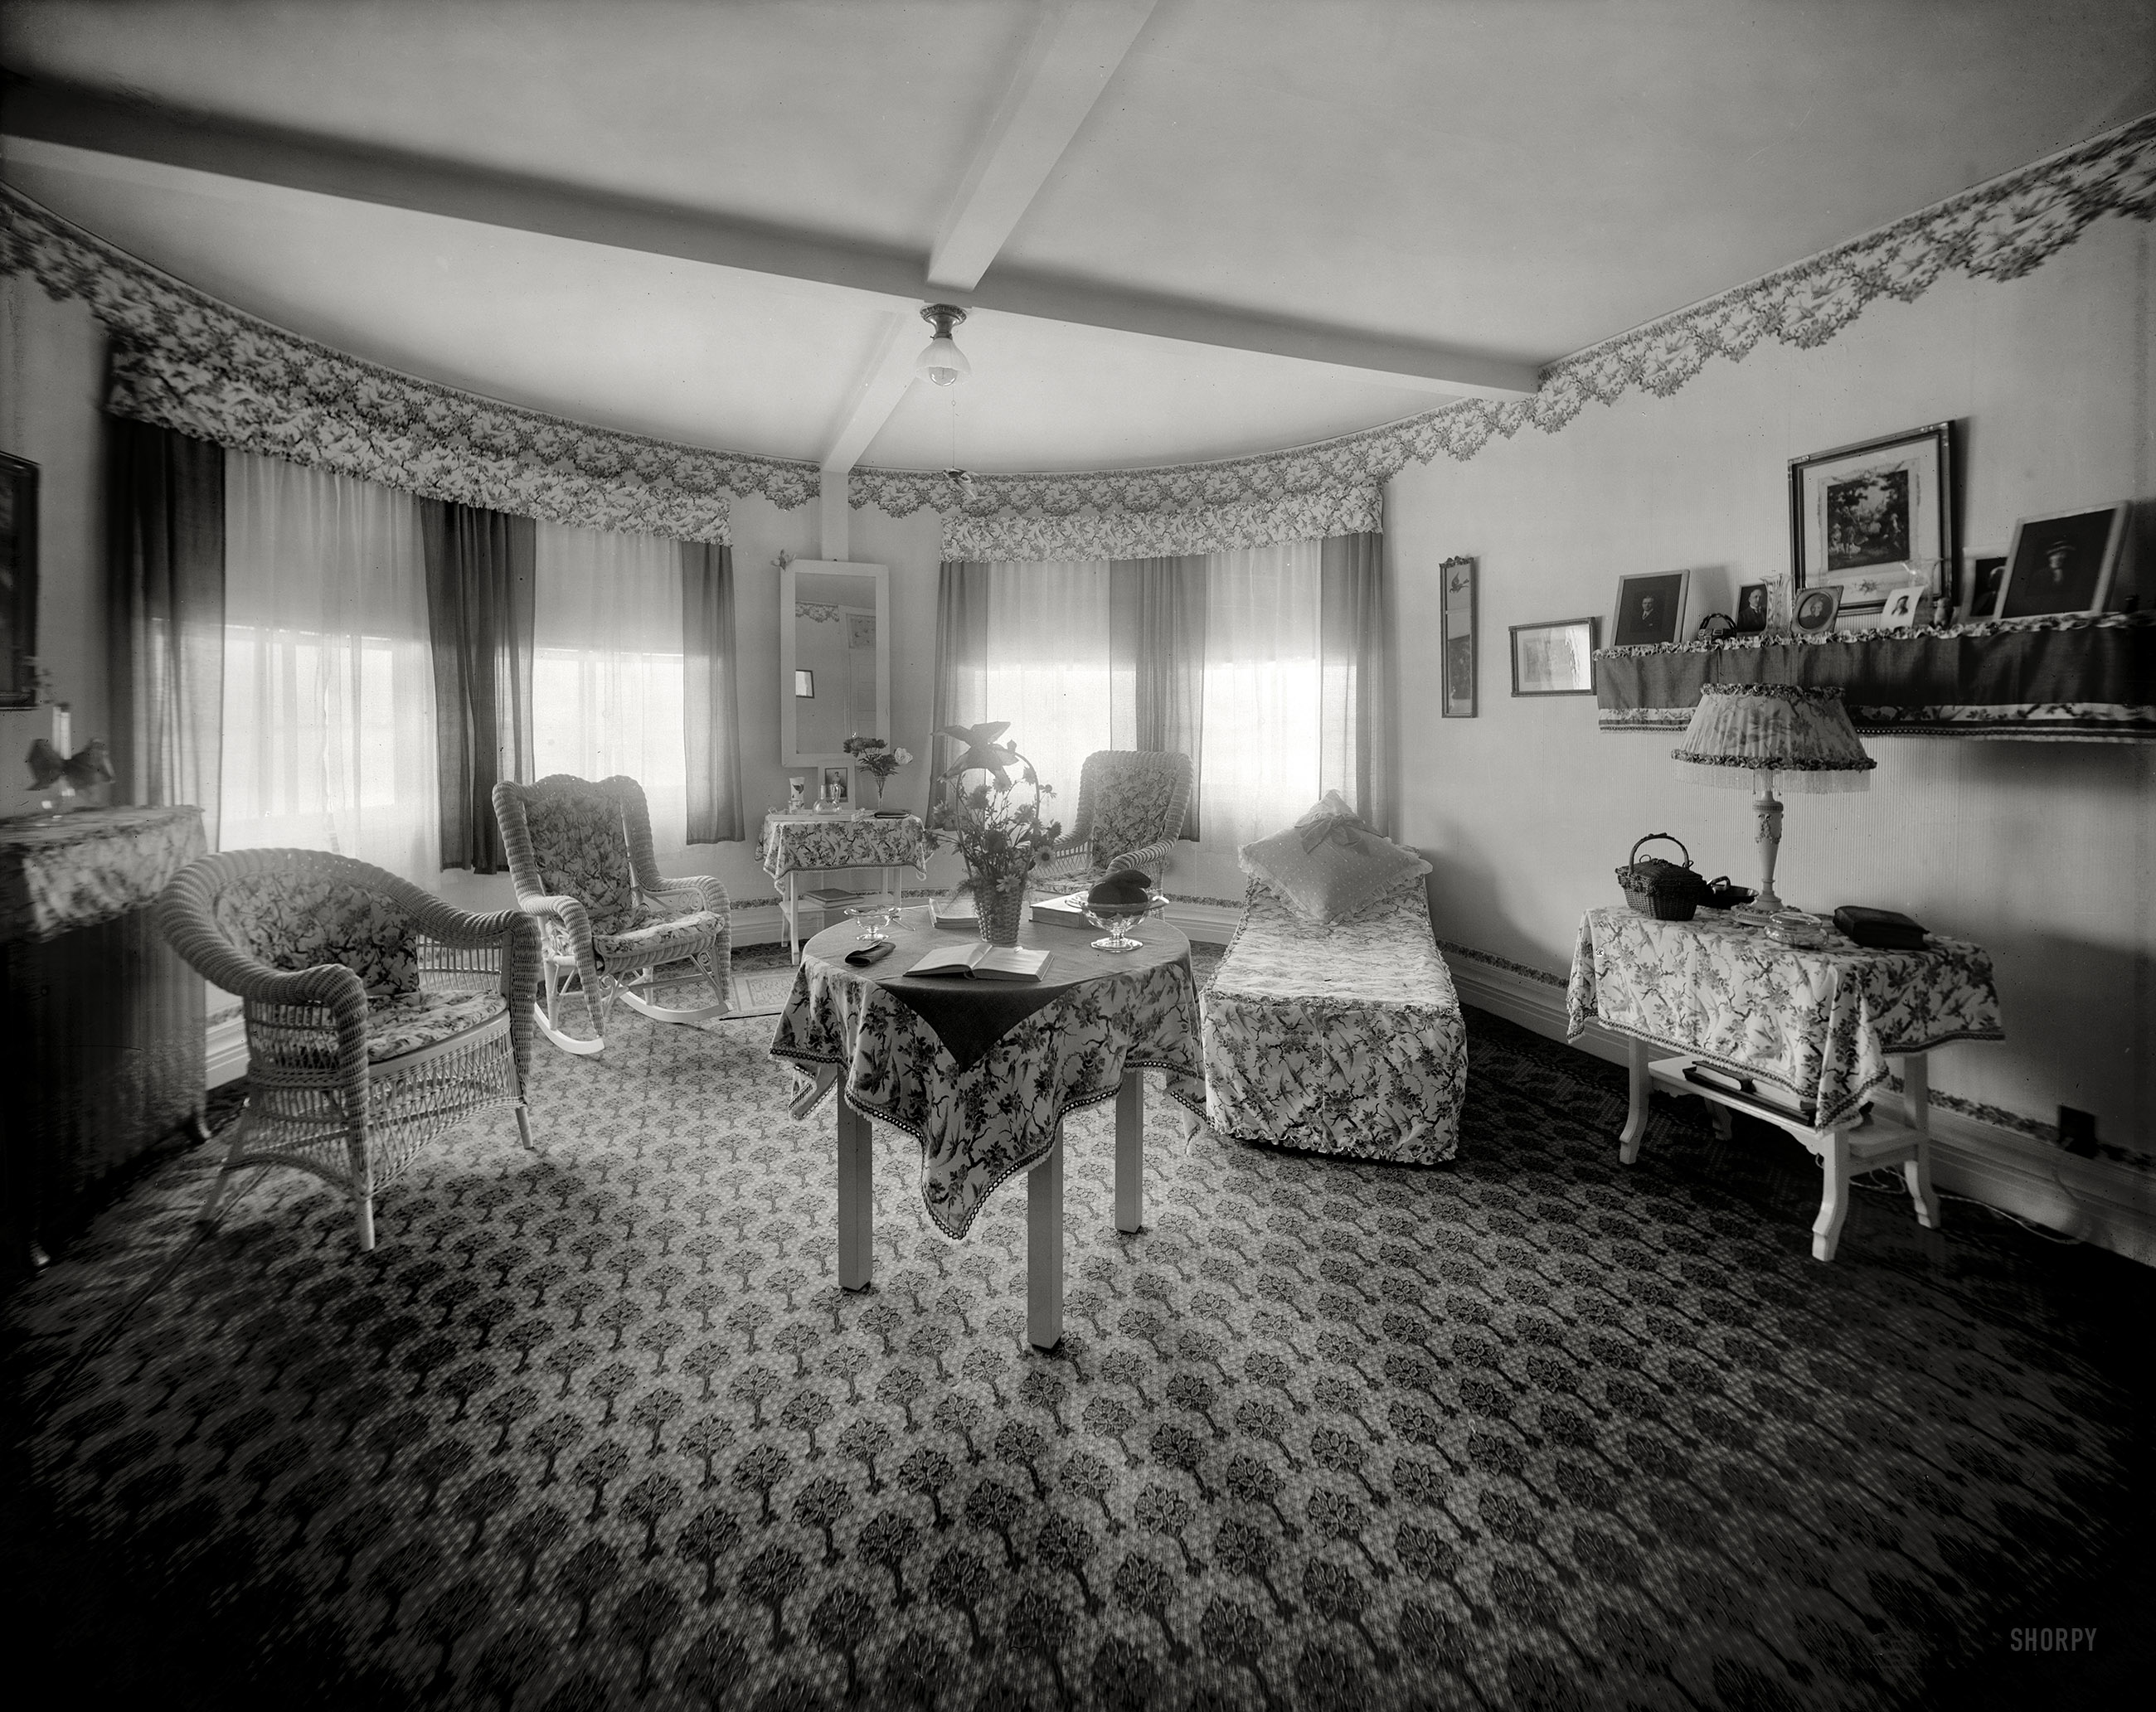 St. Clair Flats, Michigan, circa 1904. "The Old Club." 8x10 inch dry plate glass negative, Detroit Publishing Company. View full size.